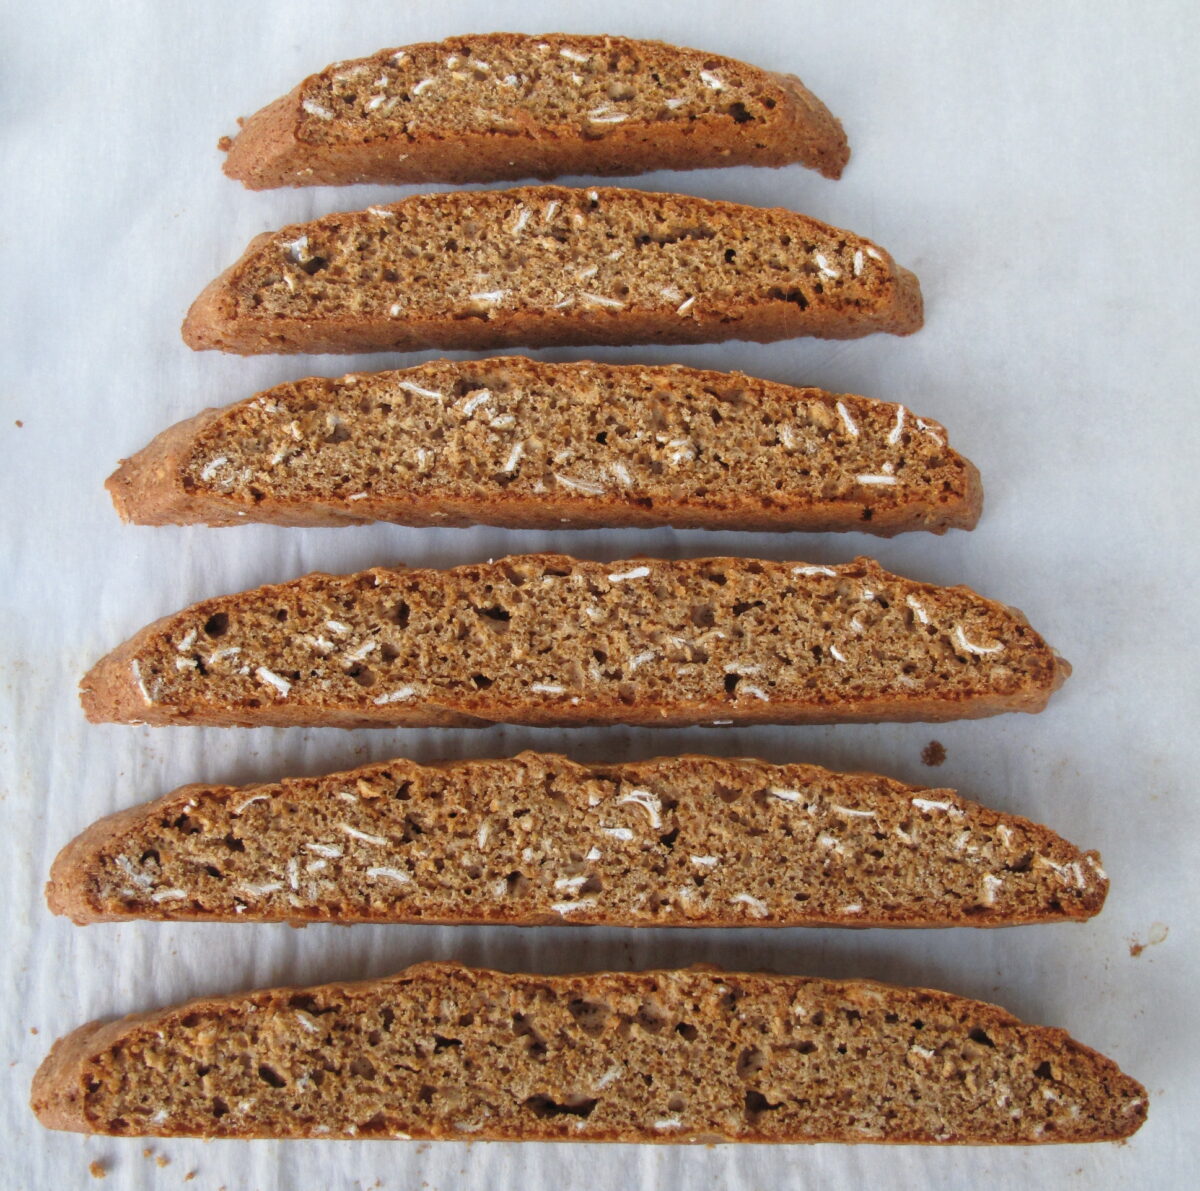 Biscotti lying with cut side up to show oats inside.